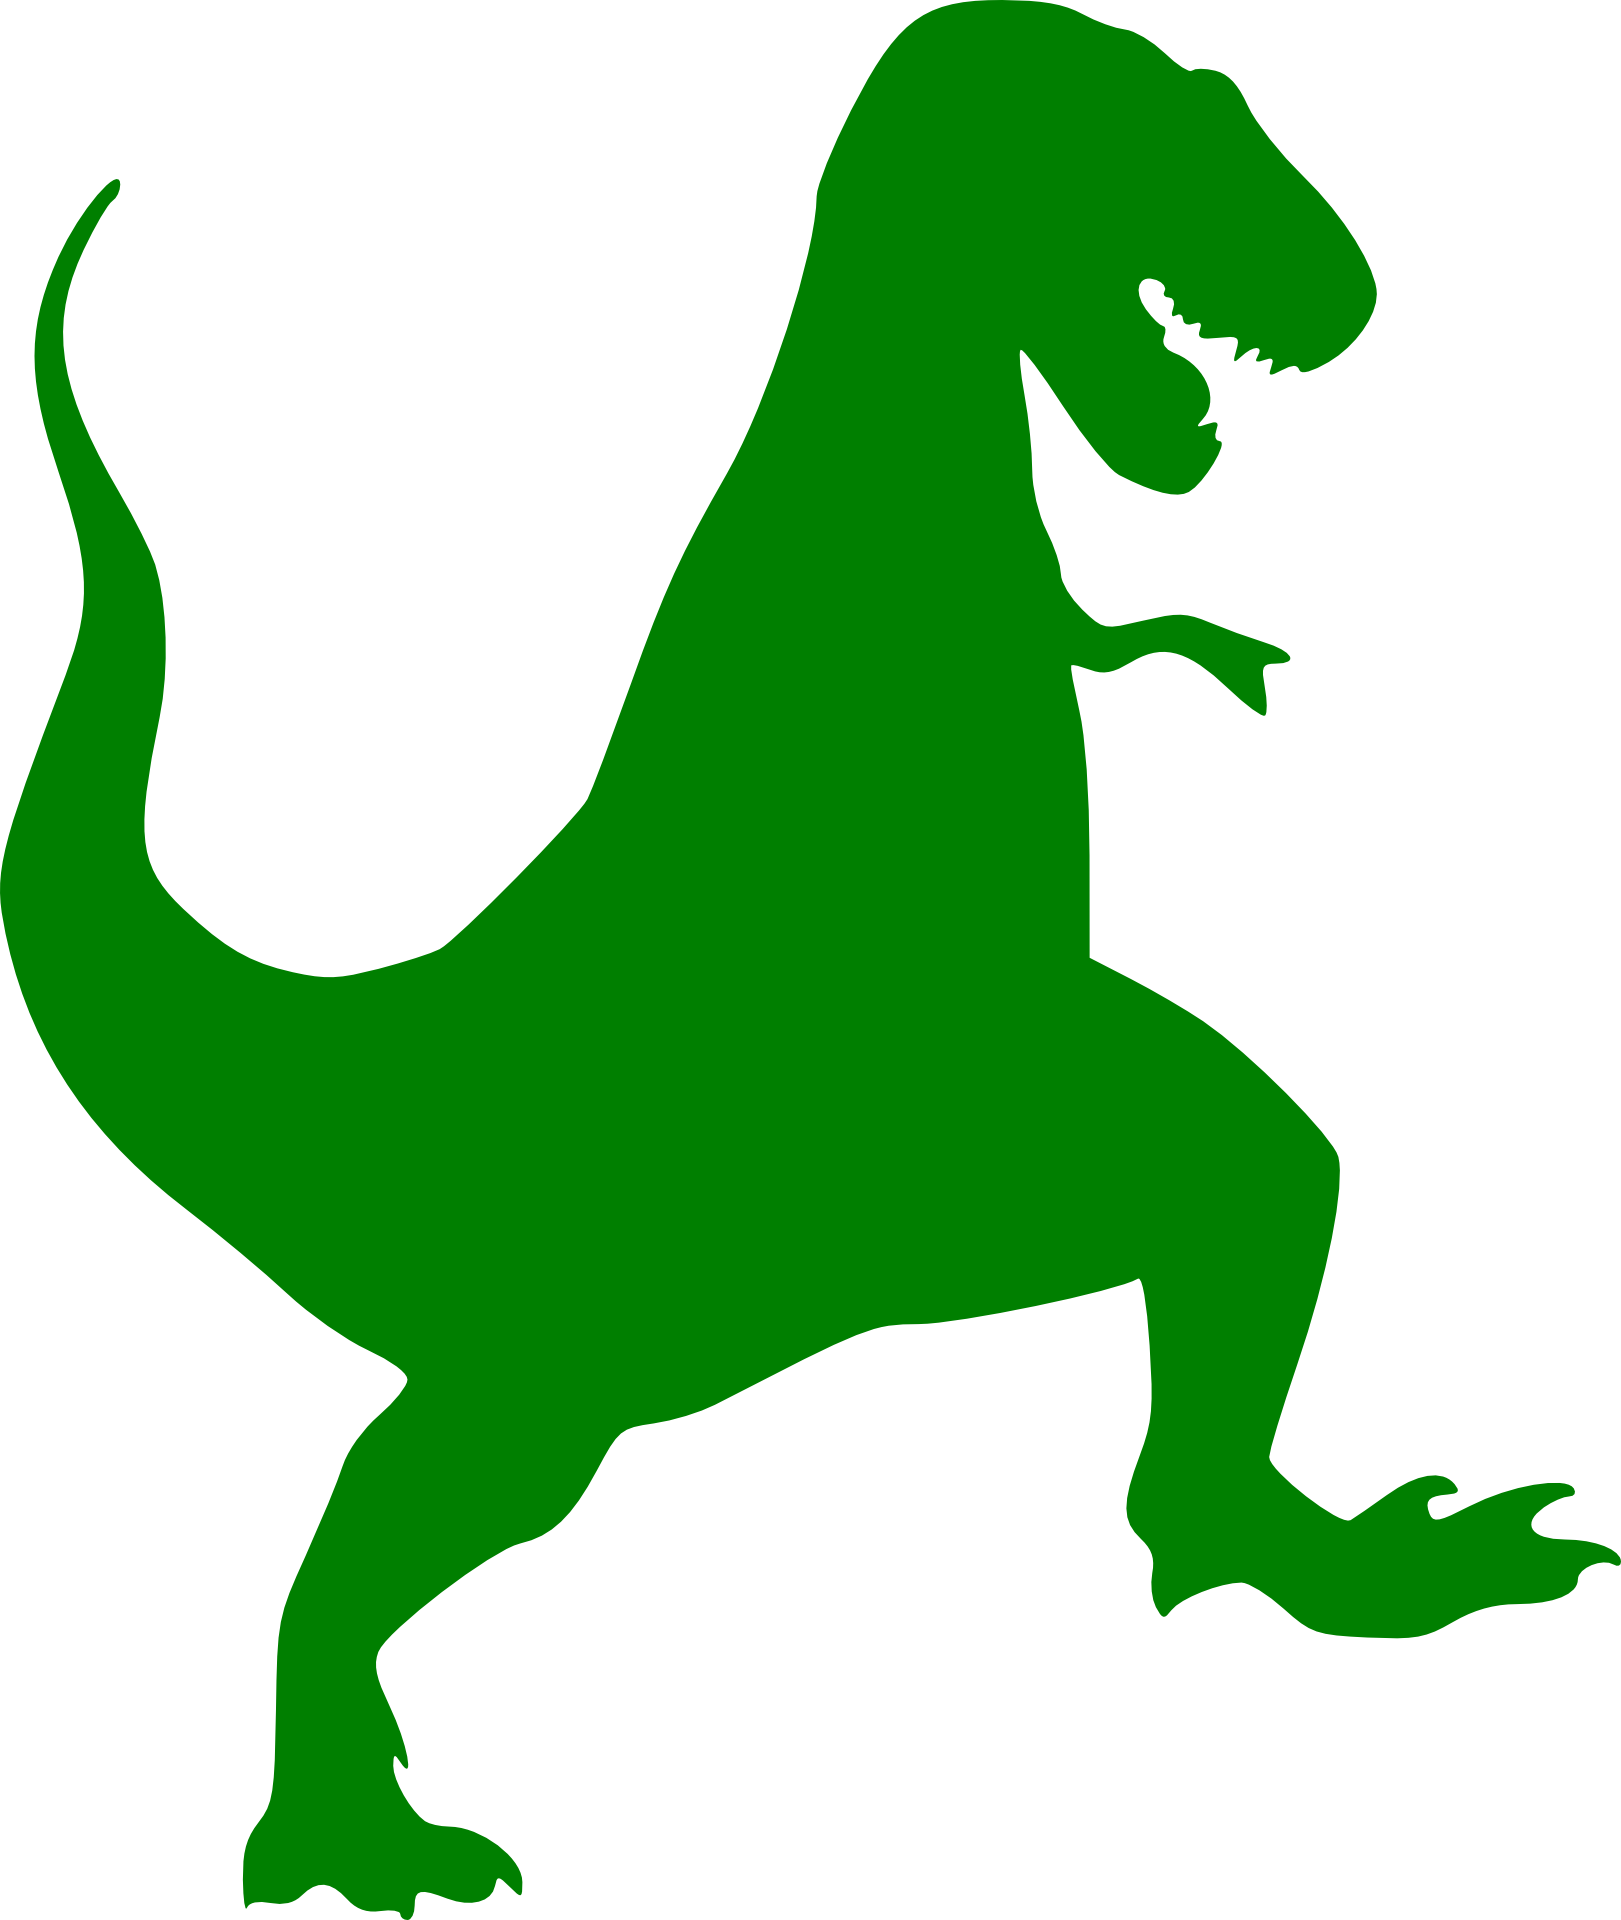 A Green Dinosaur Silhouette On A Black Background